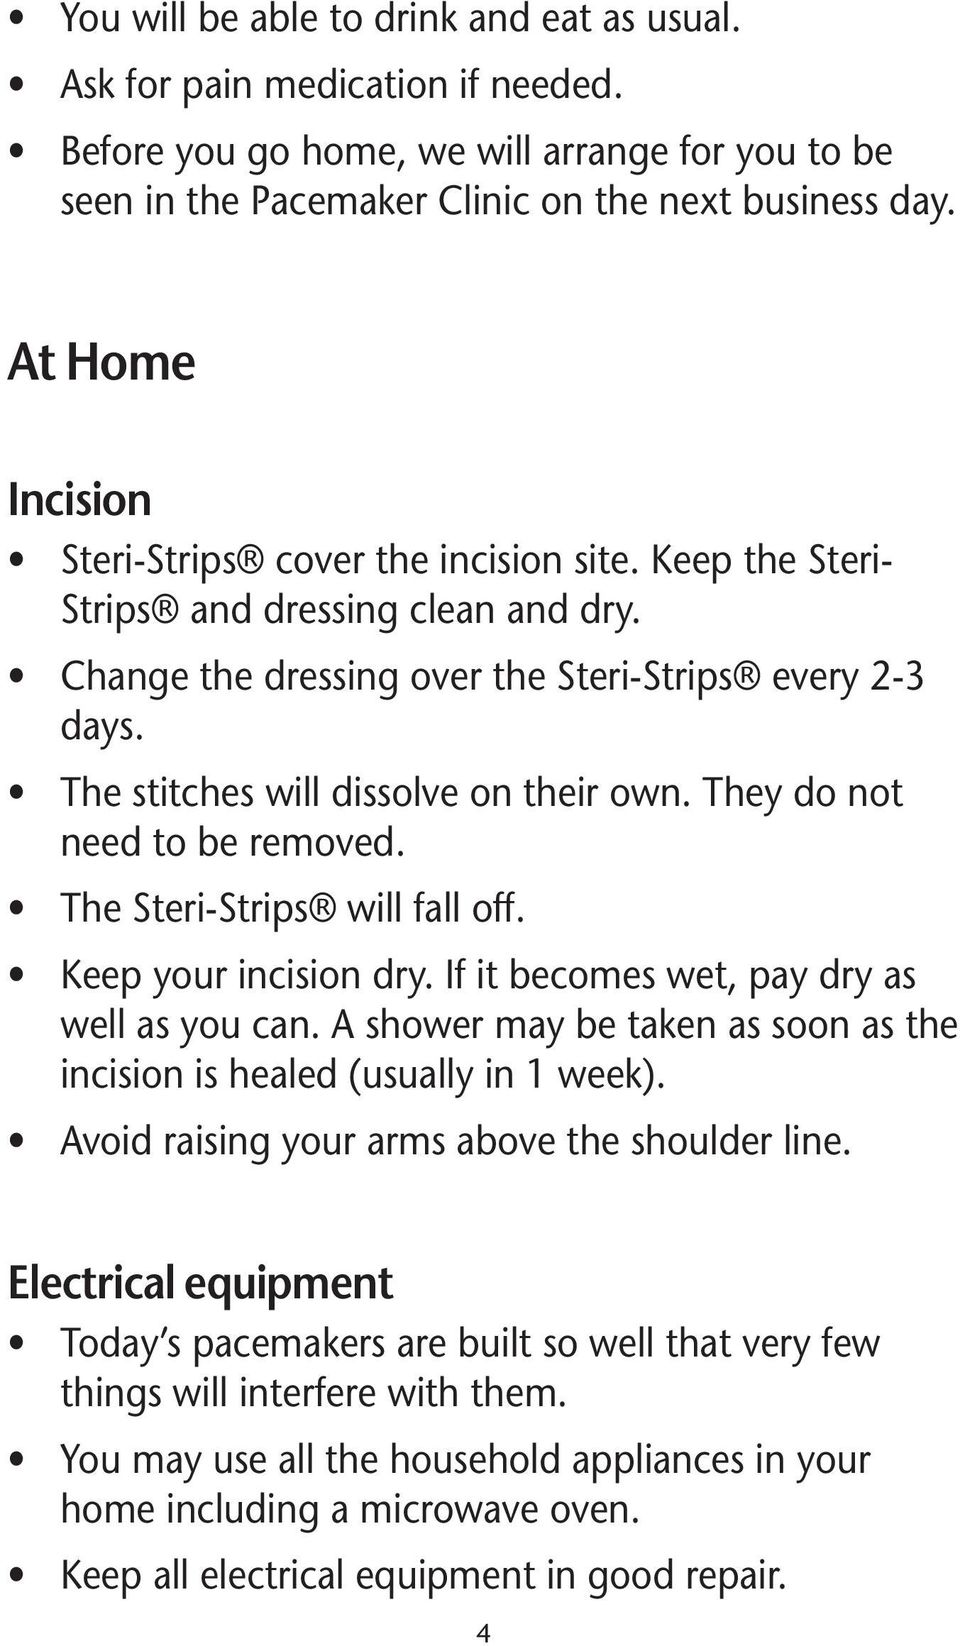 The stitches will dissolve on their own. They do not need to be removed. The Steri-Strips will fall off. Keep your incision dry. If it becomes wet, pay dry as well as you can.